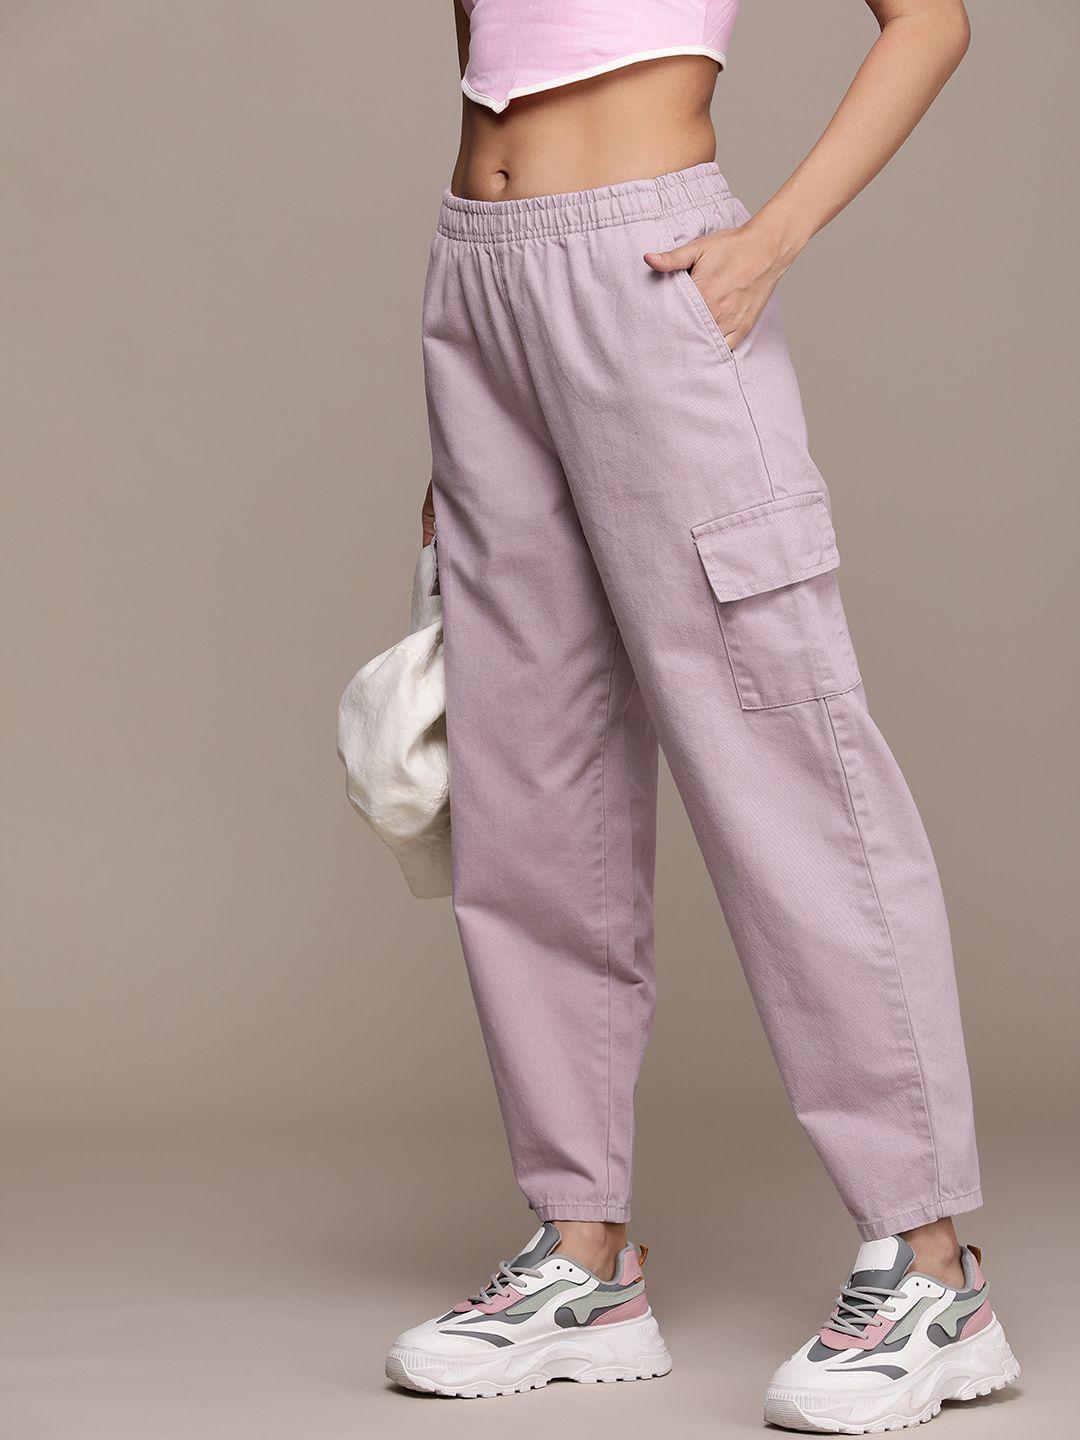 the roadster lifestyle co. women pure cotton cargos trousers